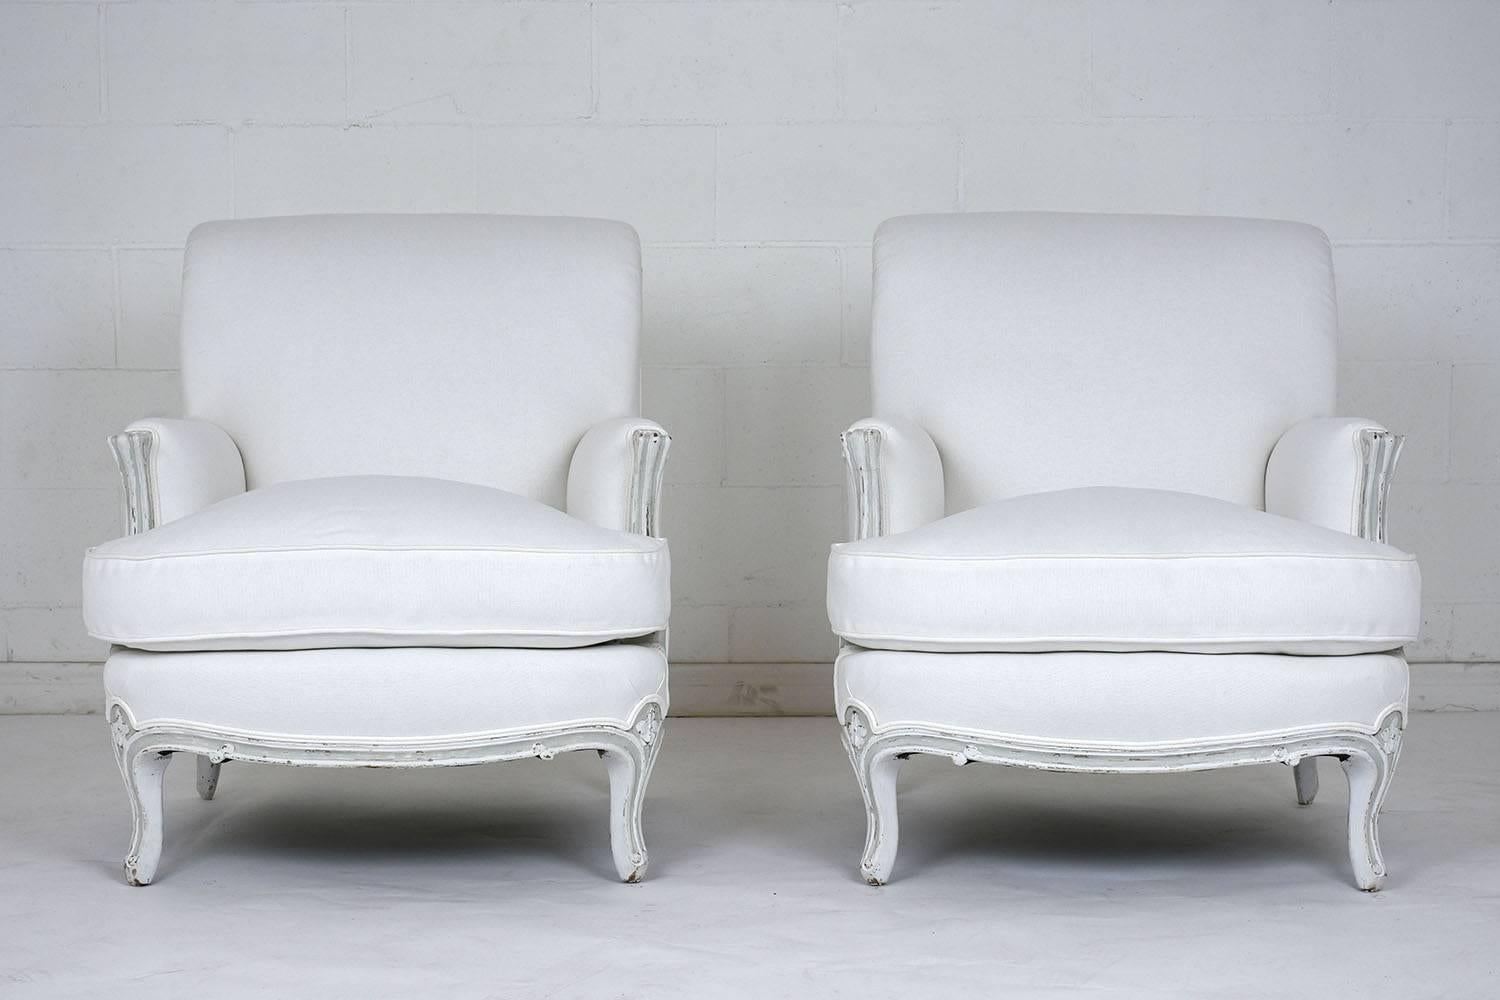 This comfortable pair of 1900's French Louis XV-style bergeres have recently been professionally upholstered in a white linen with double piping trim details. There is a single cushion on the extra deep seat with feather inserts. The carved walnut